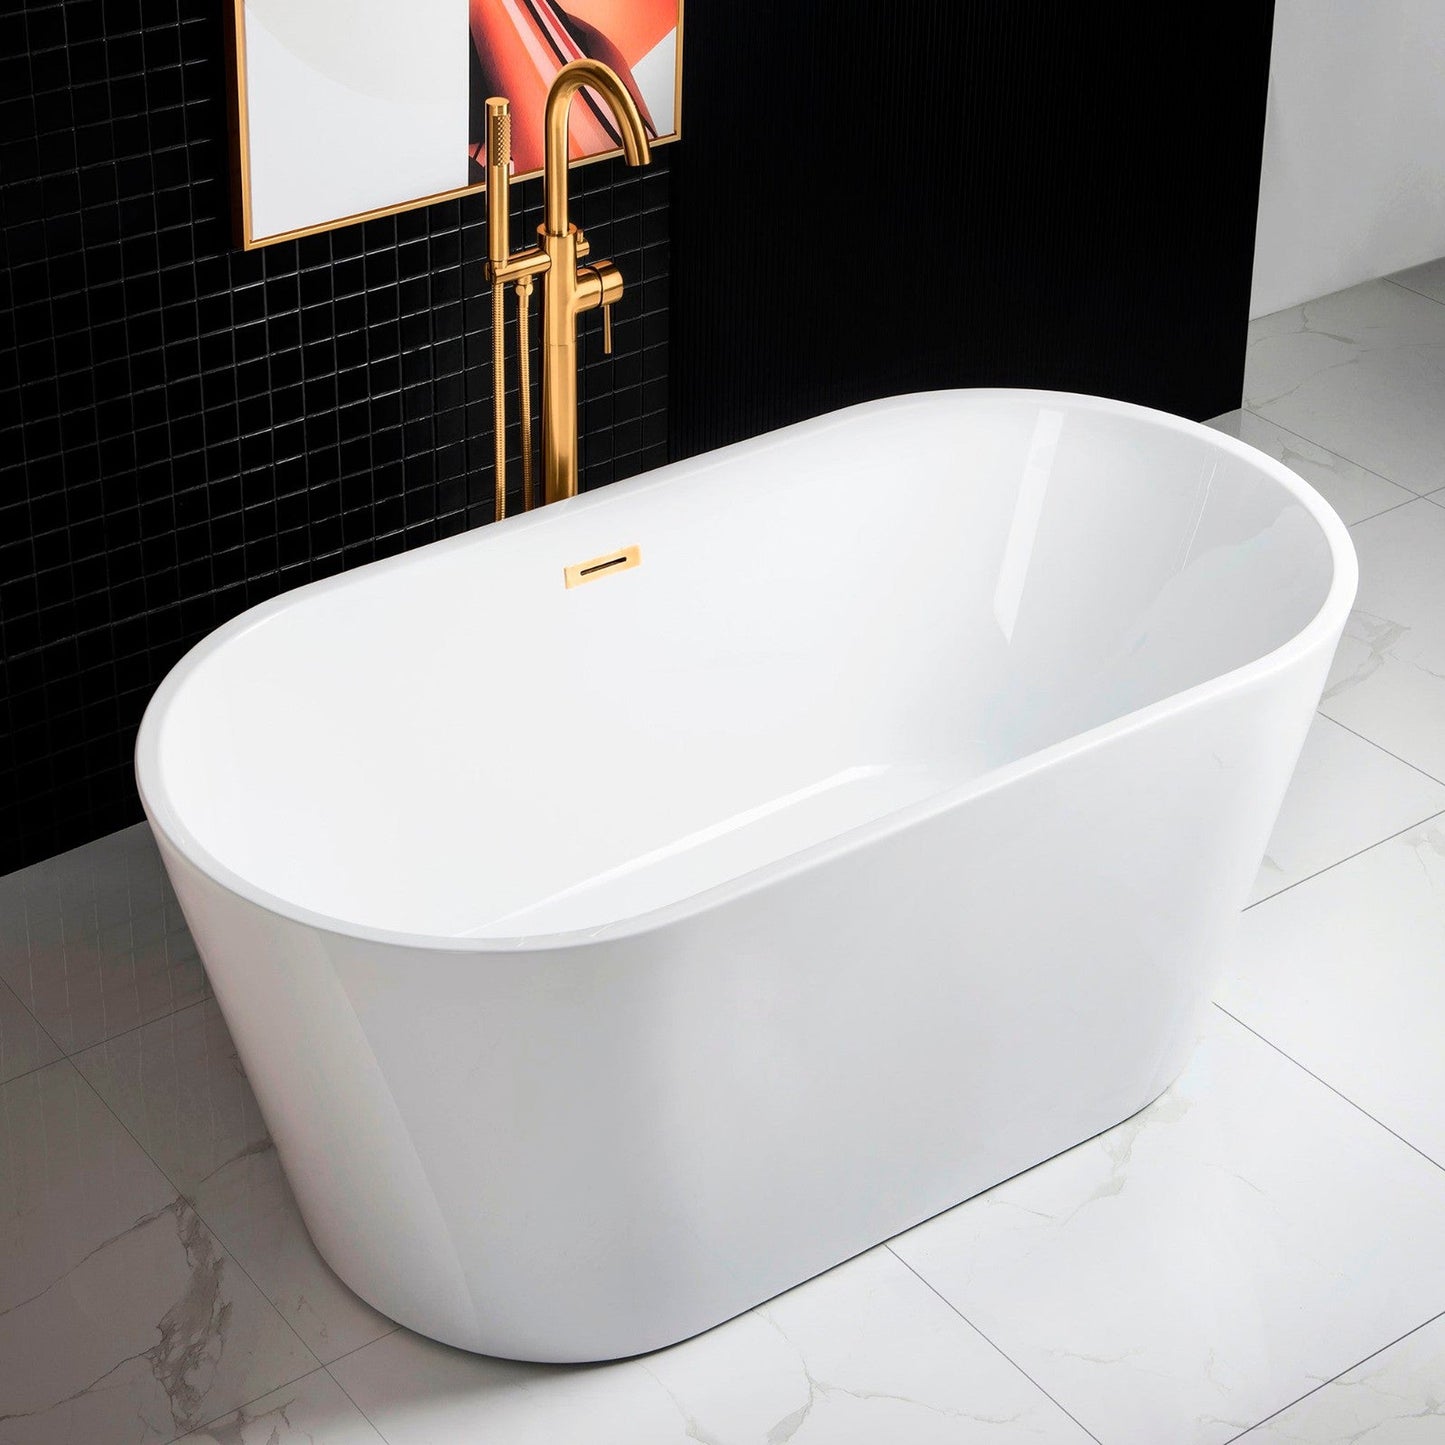 WoodBridge B0014 59" White Acrylic Freestanding Soaking Bathtub With Brushed Gold Drain, Overflow, F-0008 Tub Filler and Caddy Tray